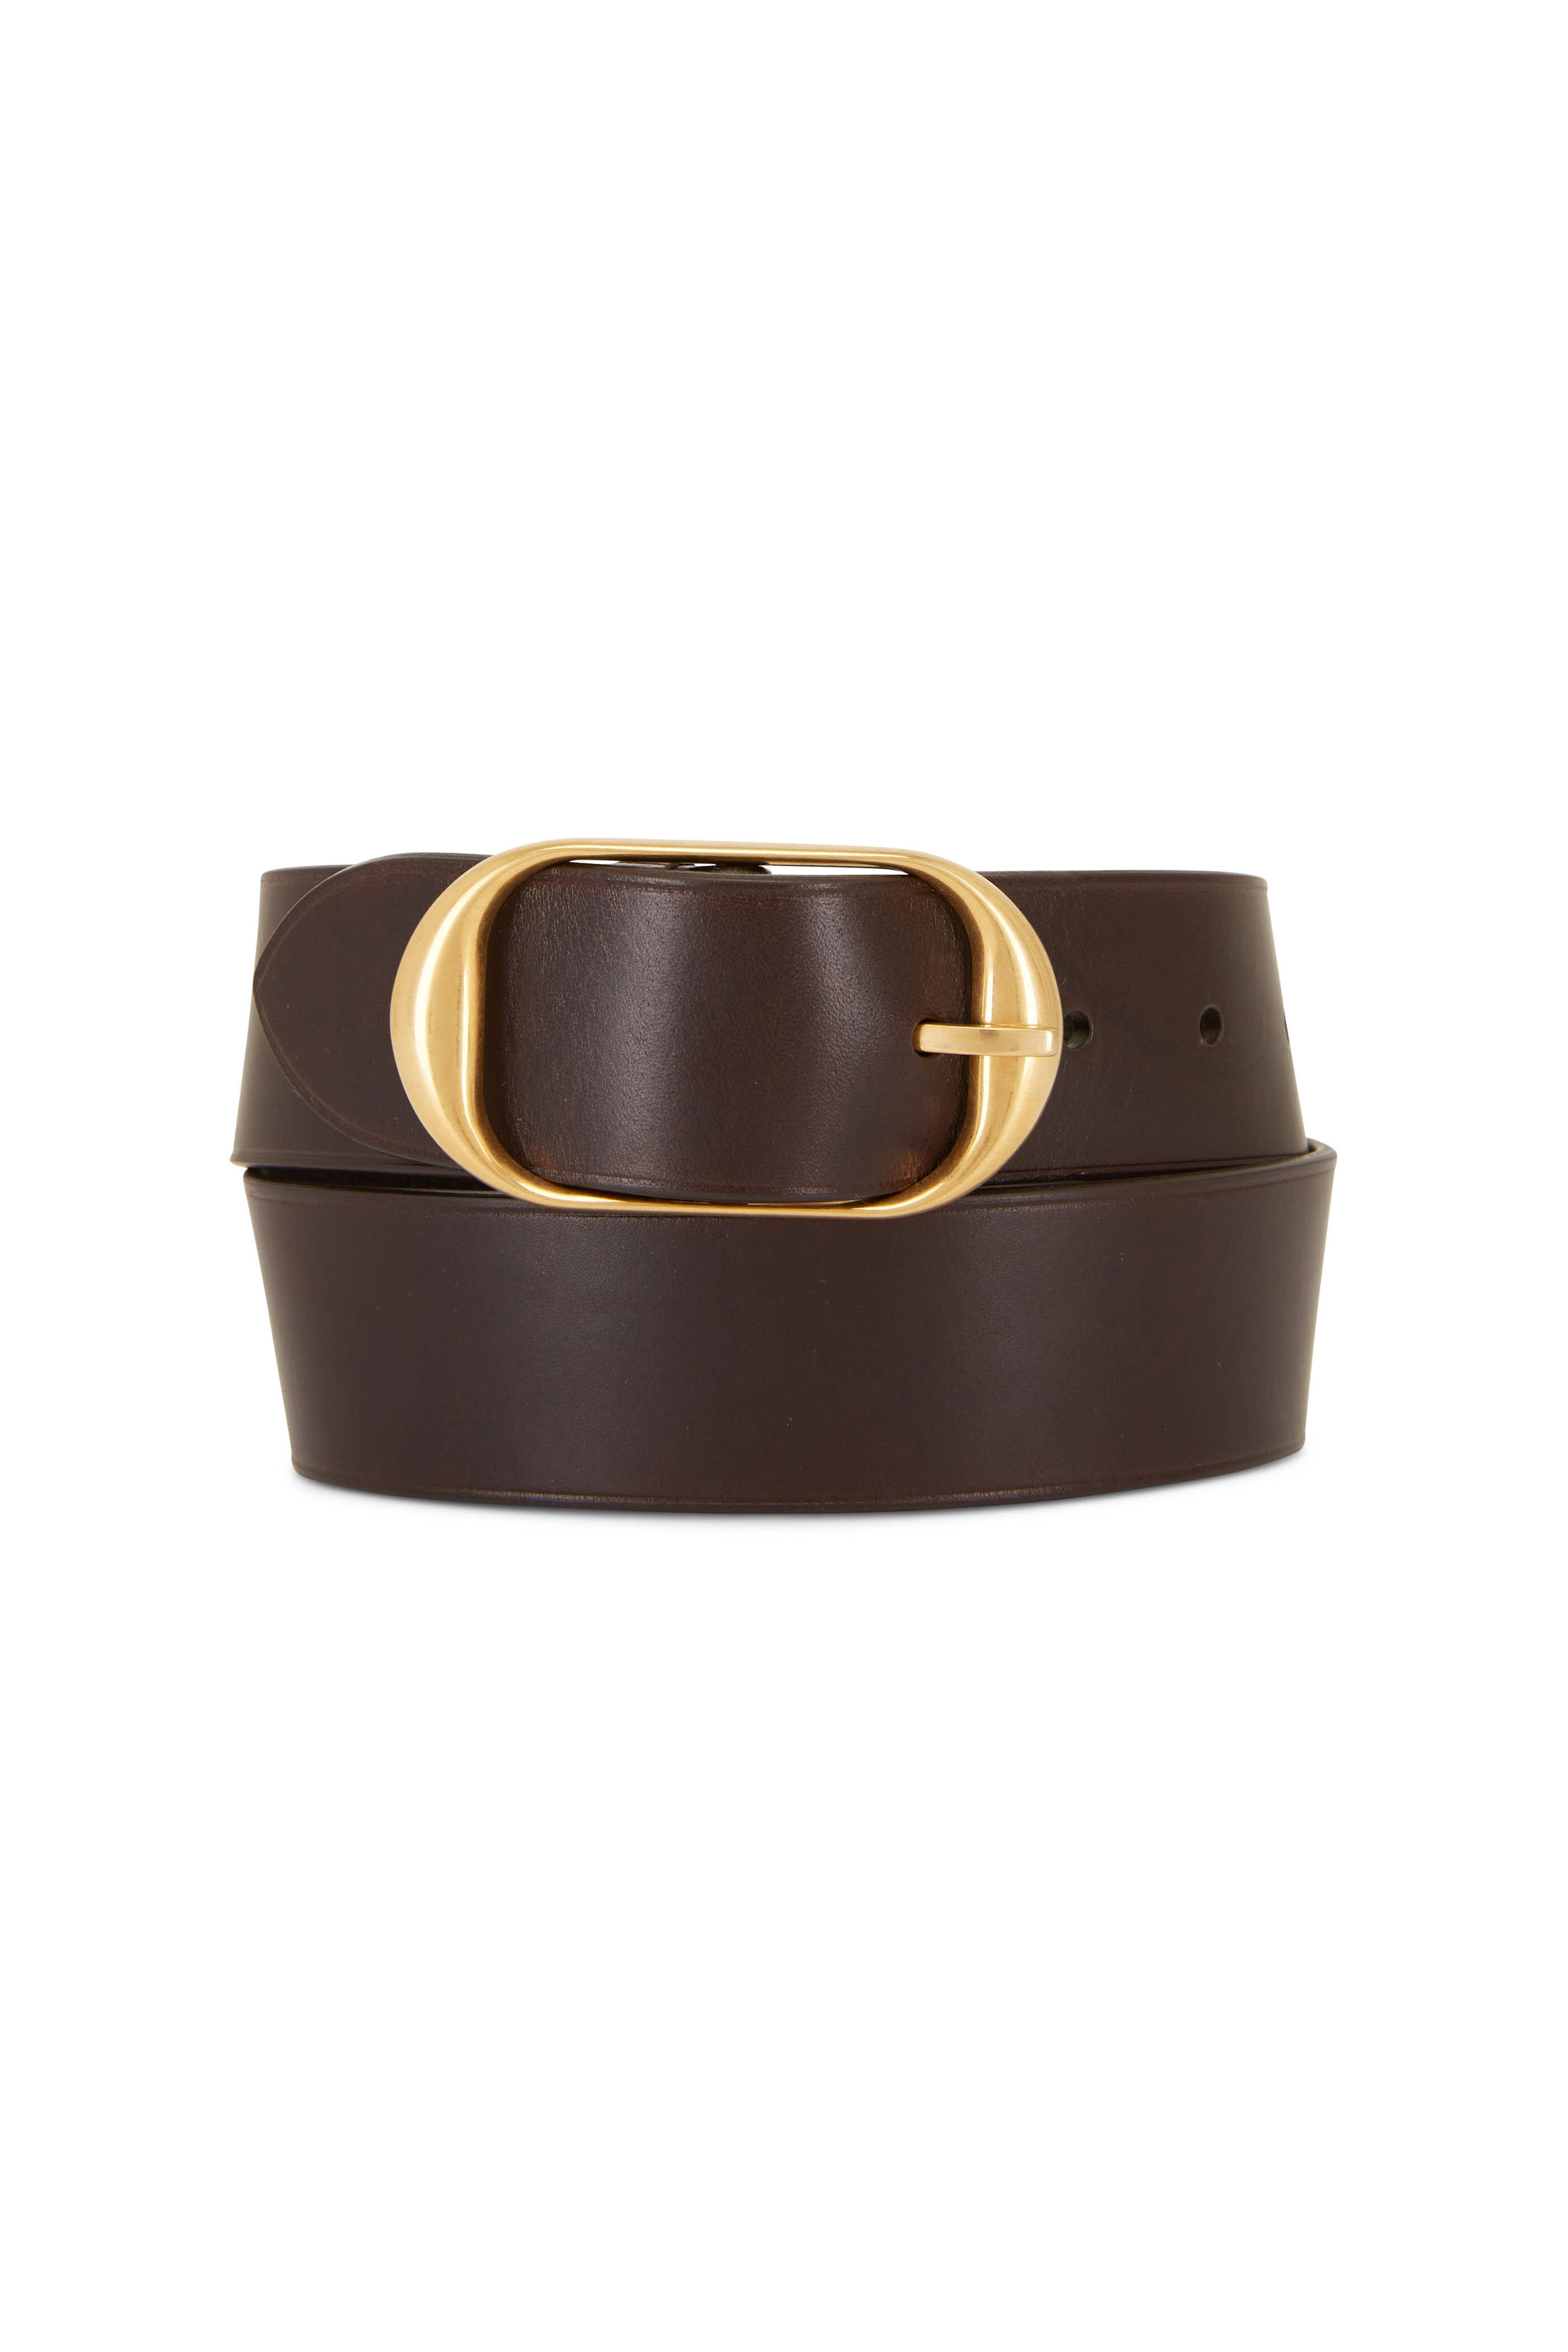 2 Cm Louis Vuitton Womens Belt In Brown Leather With Heart